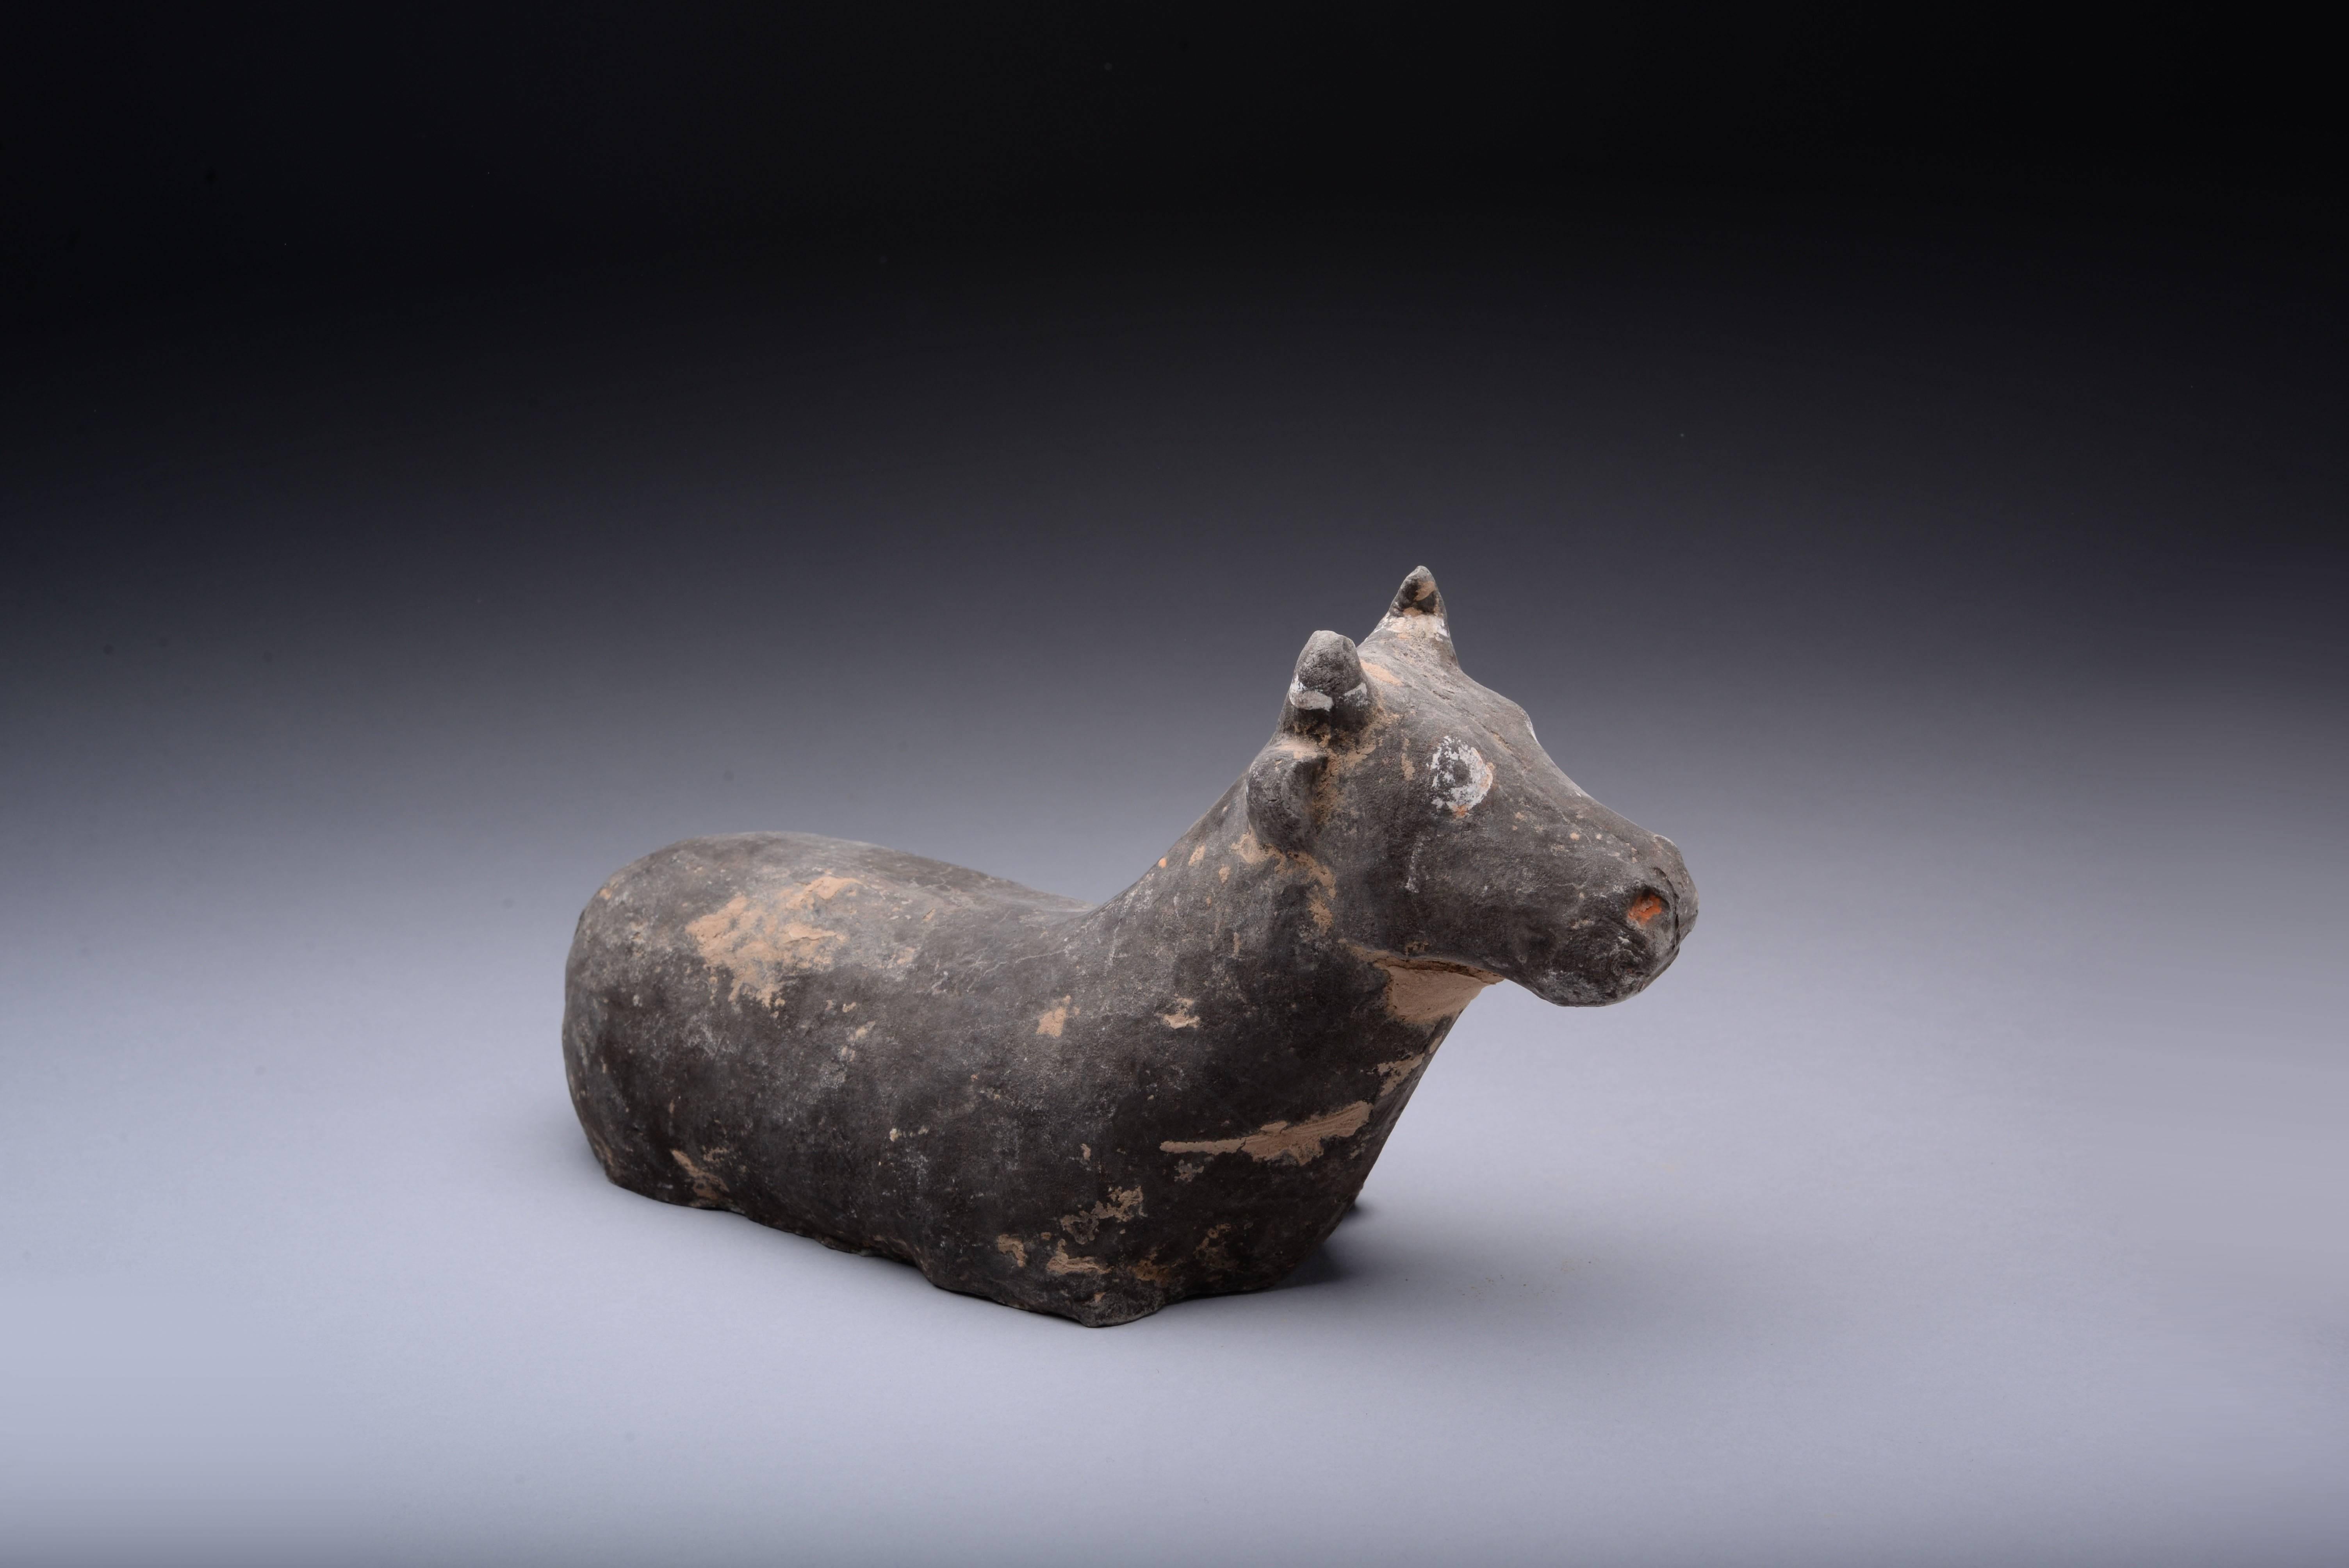 A wonderful ancient Chinese pottery figure of a recumbent bull, dating to the Han dynasty, circa 206 BC - 220 AD.

The creature shown seated, with head raised and gazing out through large, round eyes, decorated with black, white and orange